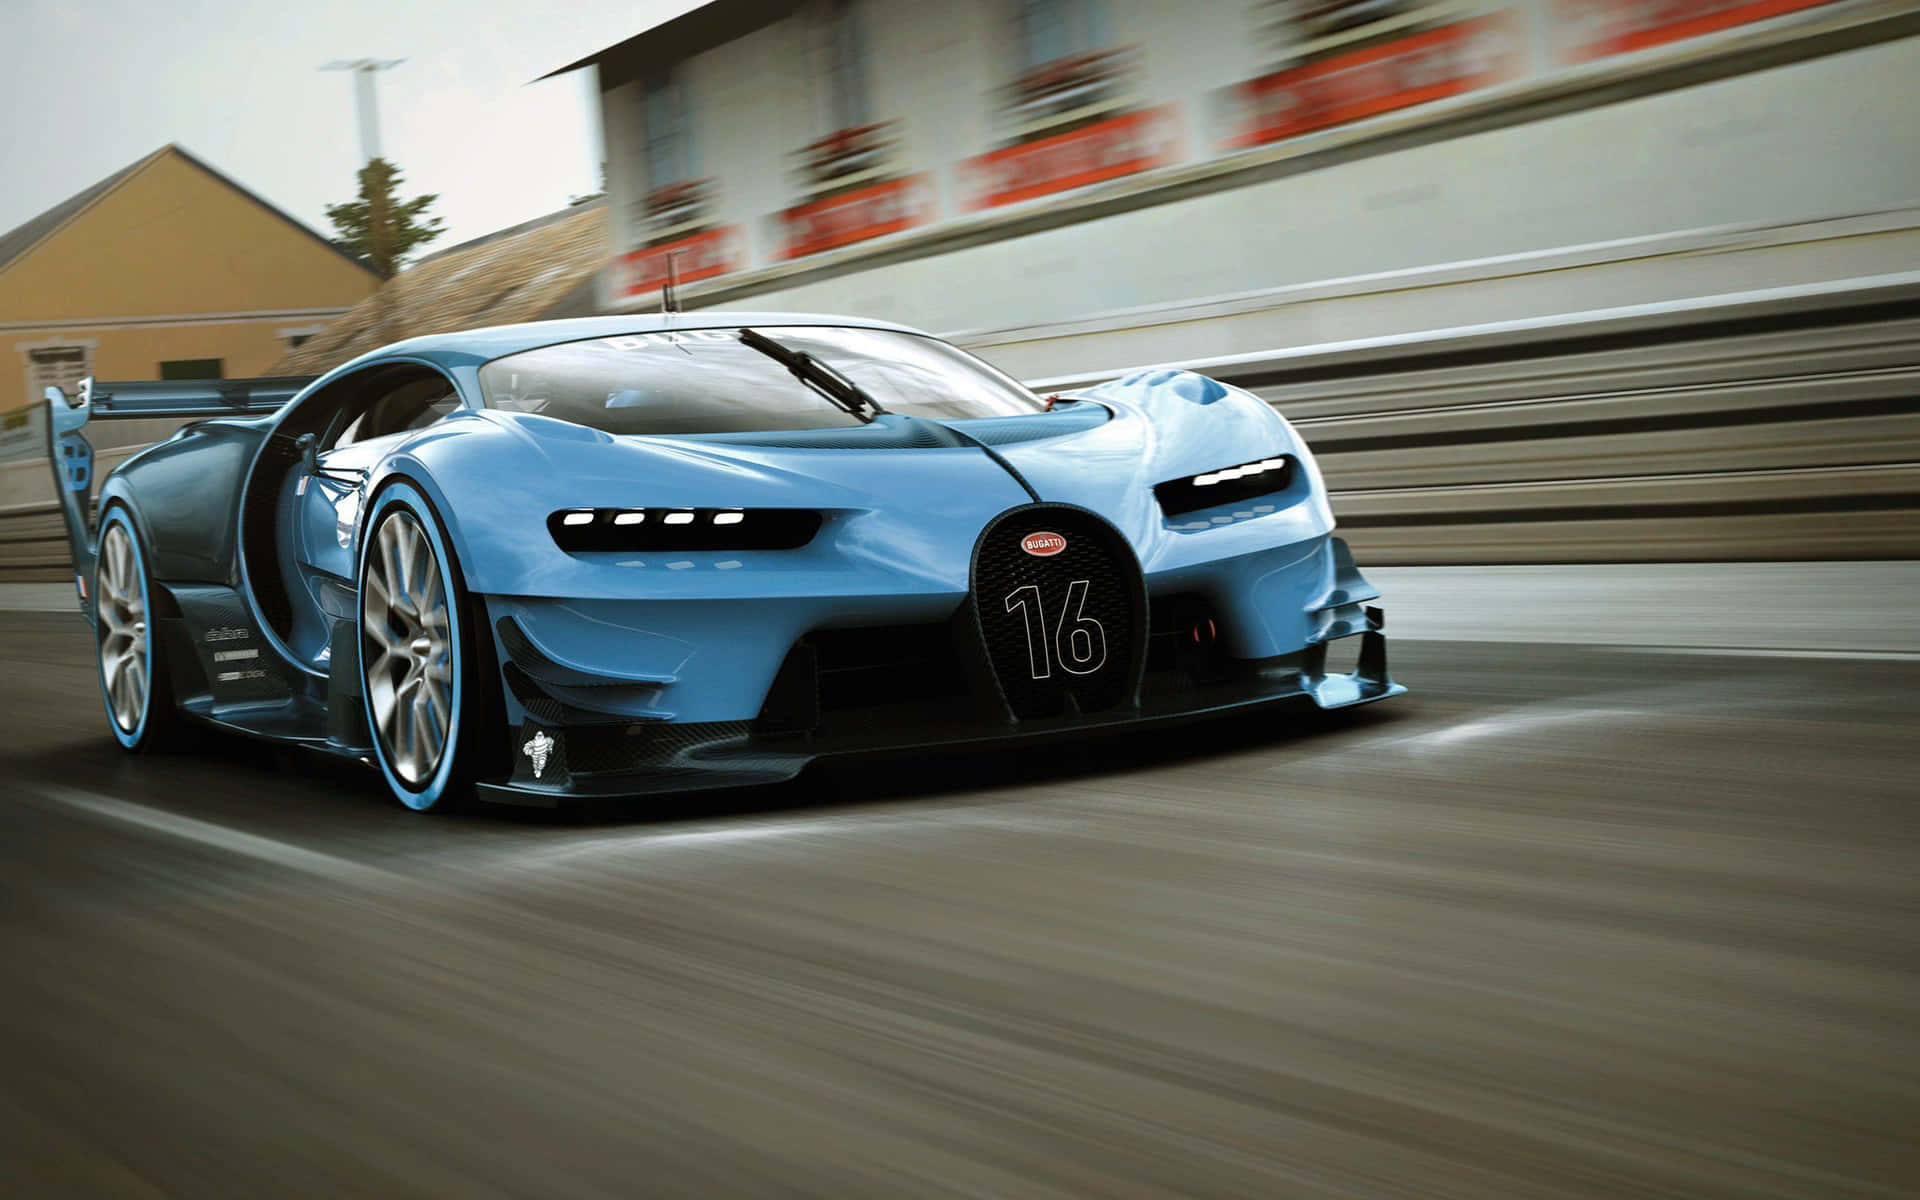 "Be the envy of all with a best-in-class Bugatti"